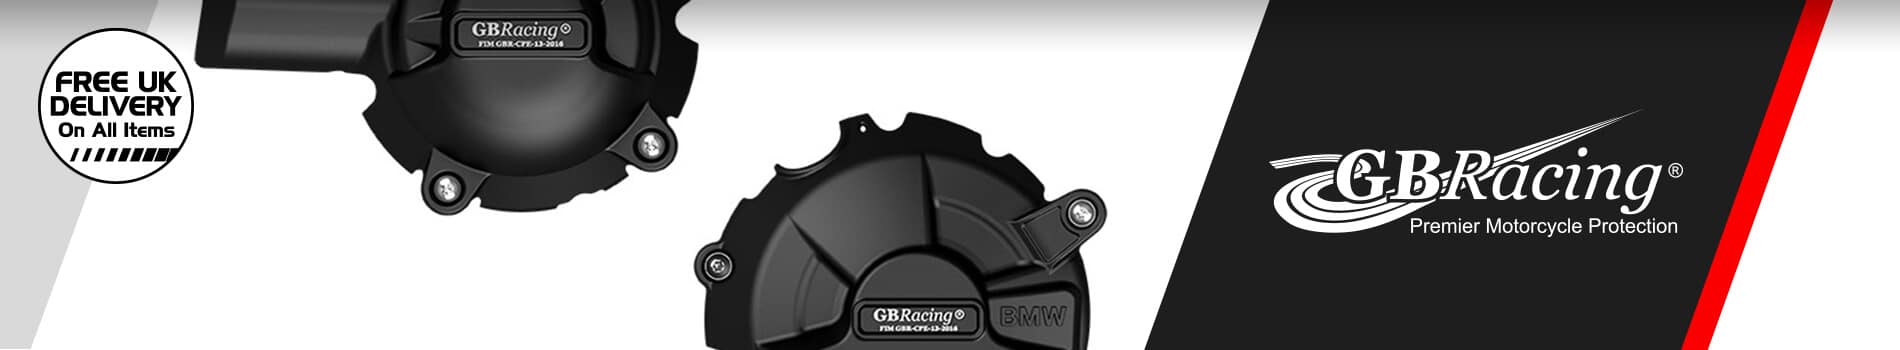 GB Racing Engine Covers - Free UK Delivery